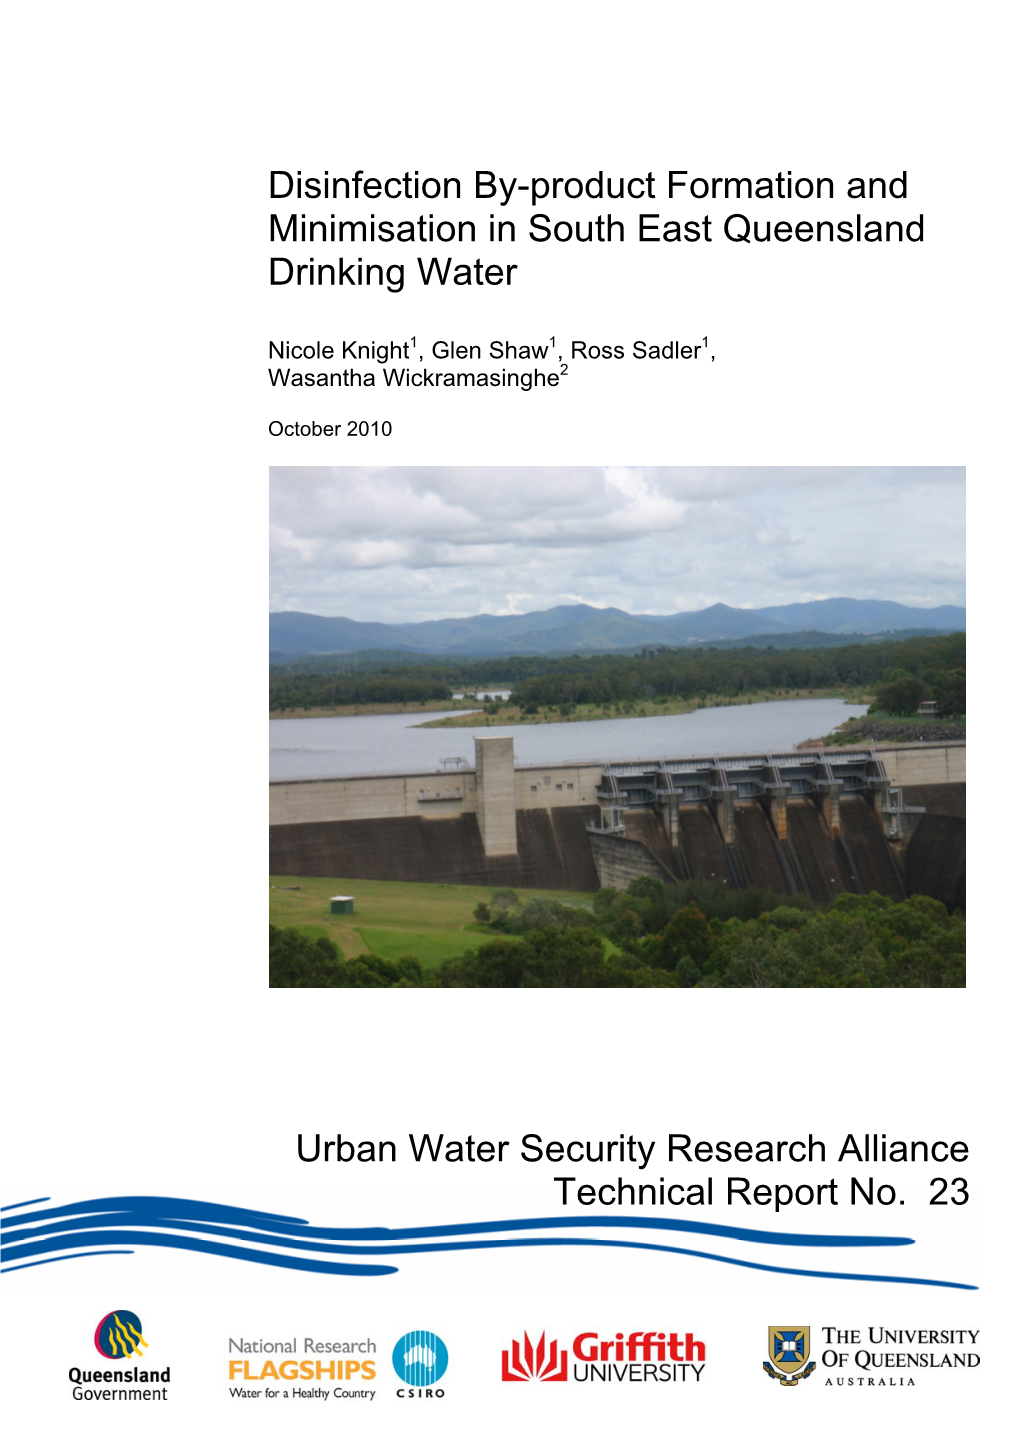 Disinfection By-Product Formation and Minimisation in South East Queensland Drinking Water